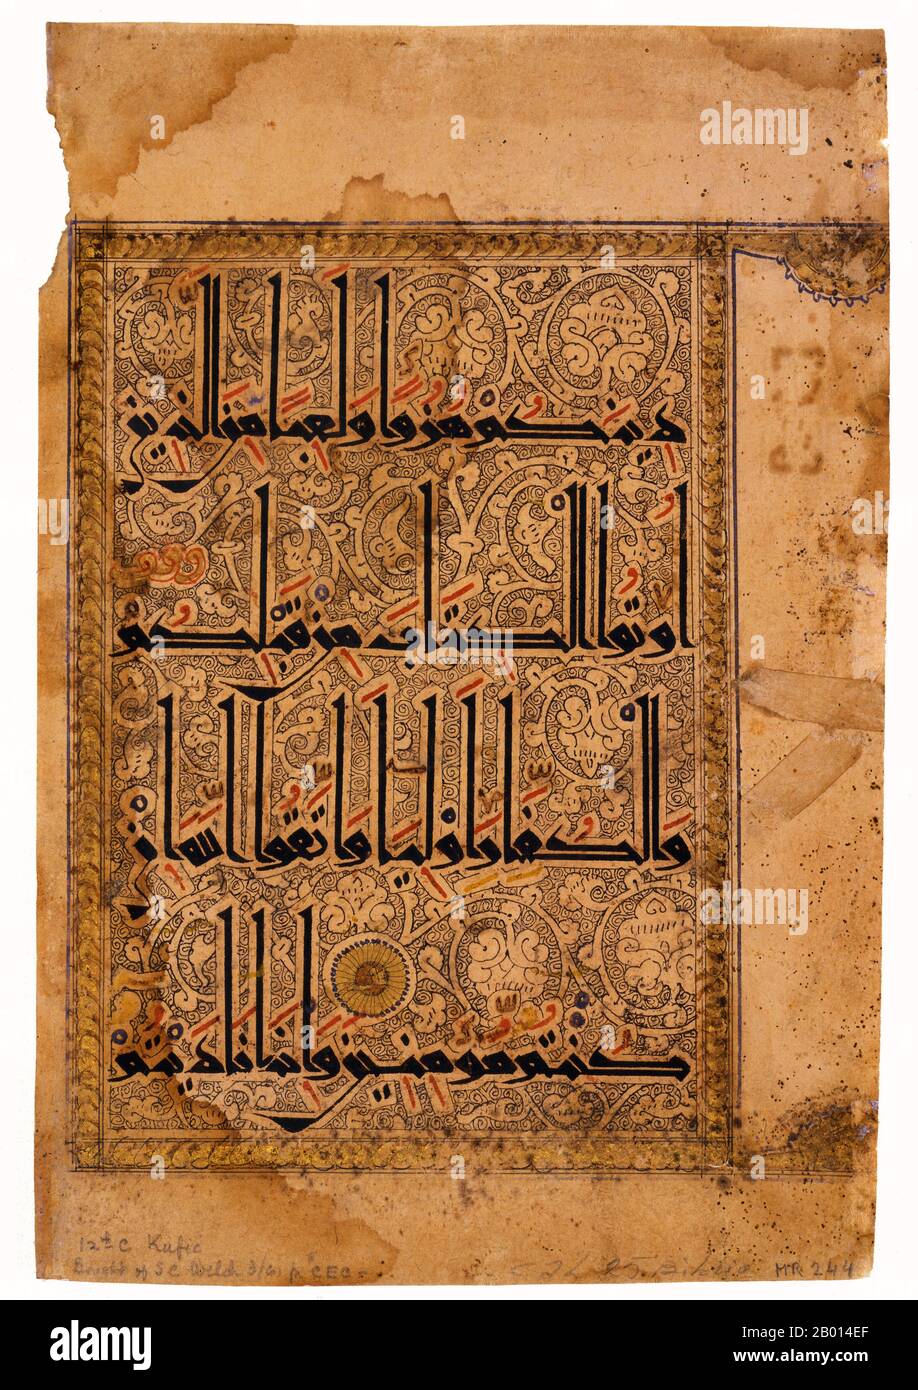 Iran: Illustrated page from an 11th century Qur'an written in Eastern Kufic script.  Eastern Kufic script is distinguished by tall upstrokes that often have left-facing serifs and curved downstrokes. The various diacritical marks that facilitate reading are carefully marked with red, blue, and black. Eastern Kufic was introduced in the 10th century at the same time as paper became the preferred material for Korans in the eastern Islamic world. Stock Photo